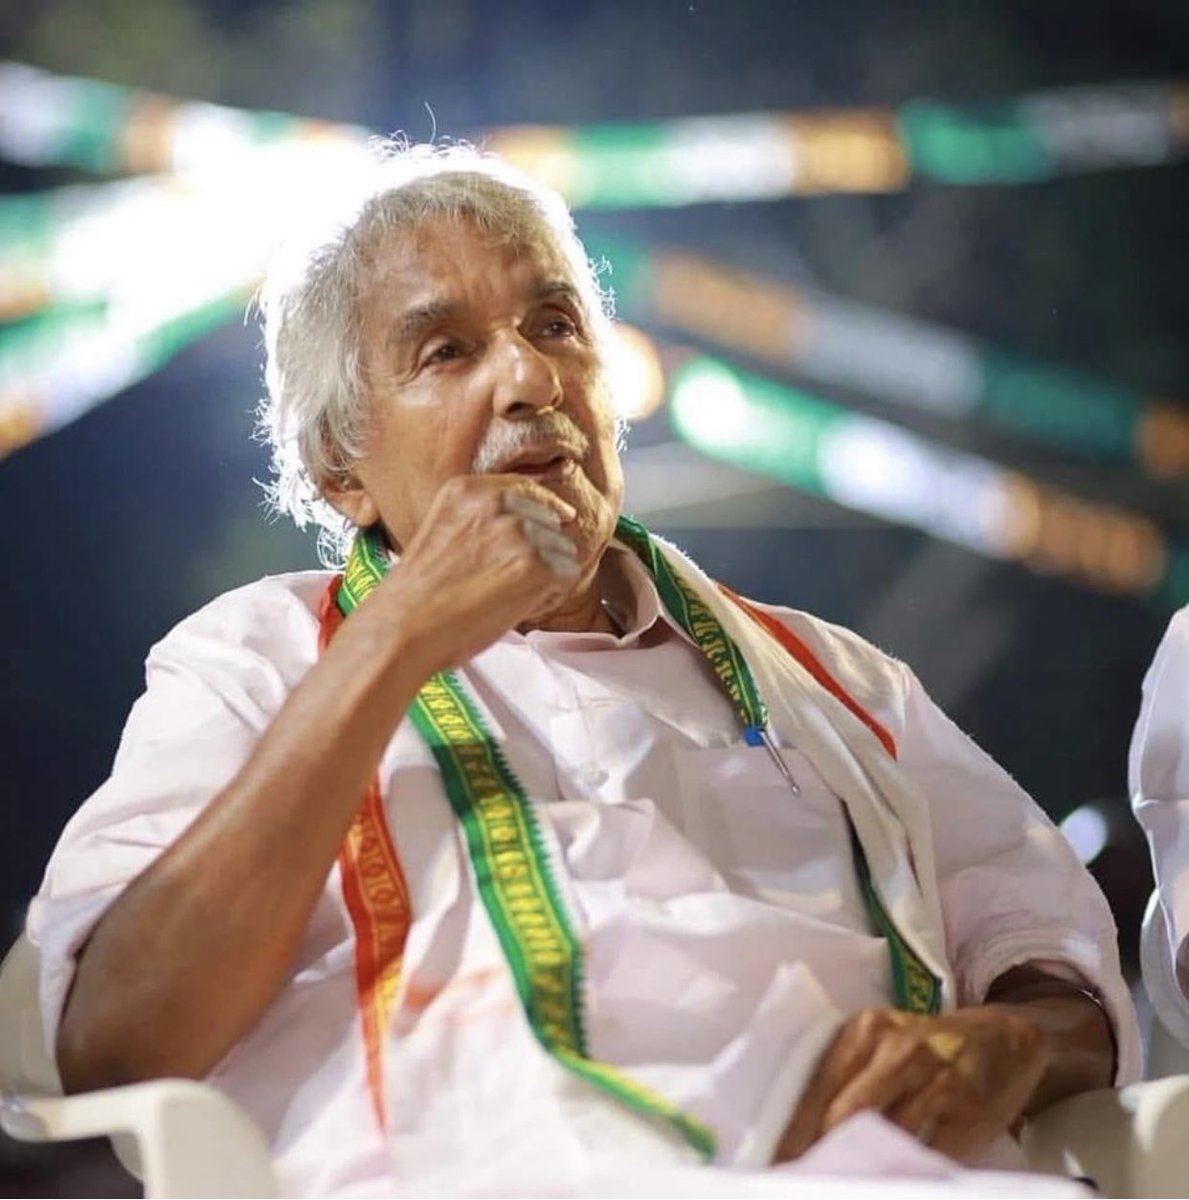 Congress Veteran and the Former Chief Minister of Kerala Shri Oommen Chandy passes away. Heartfelt Condolences to the family and May his soul Rest in Peace.